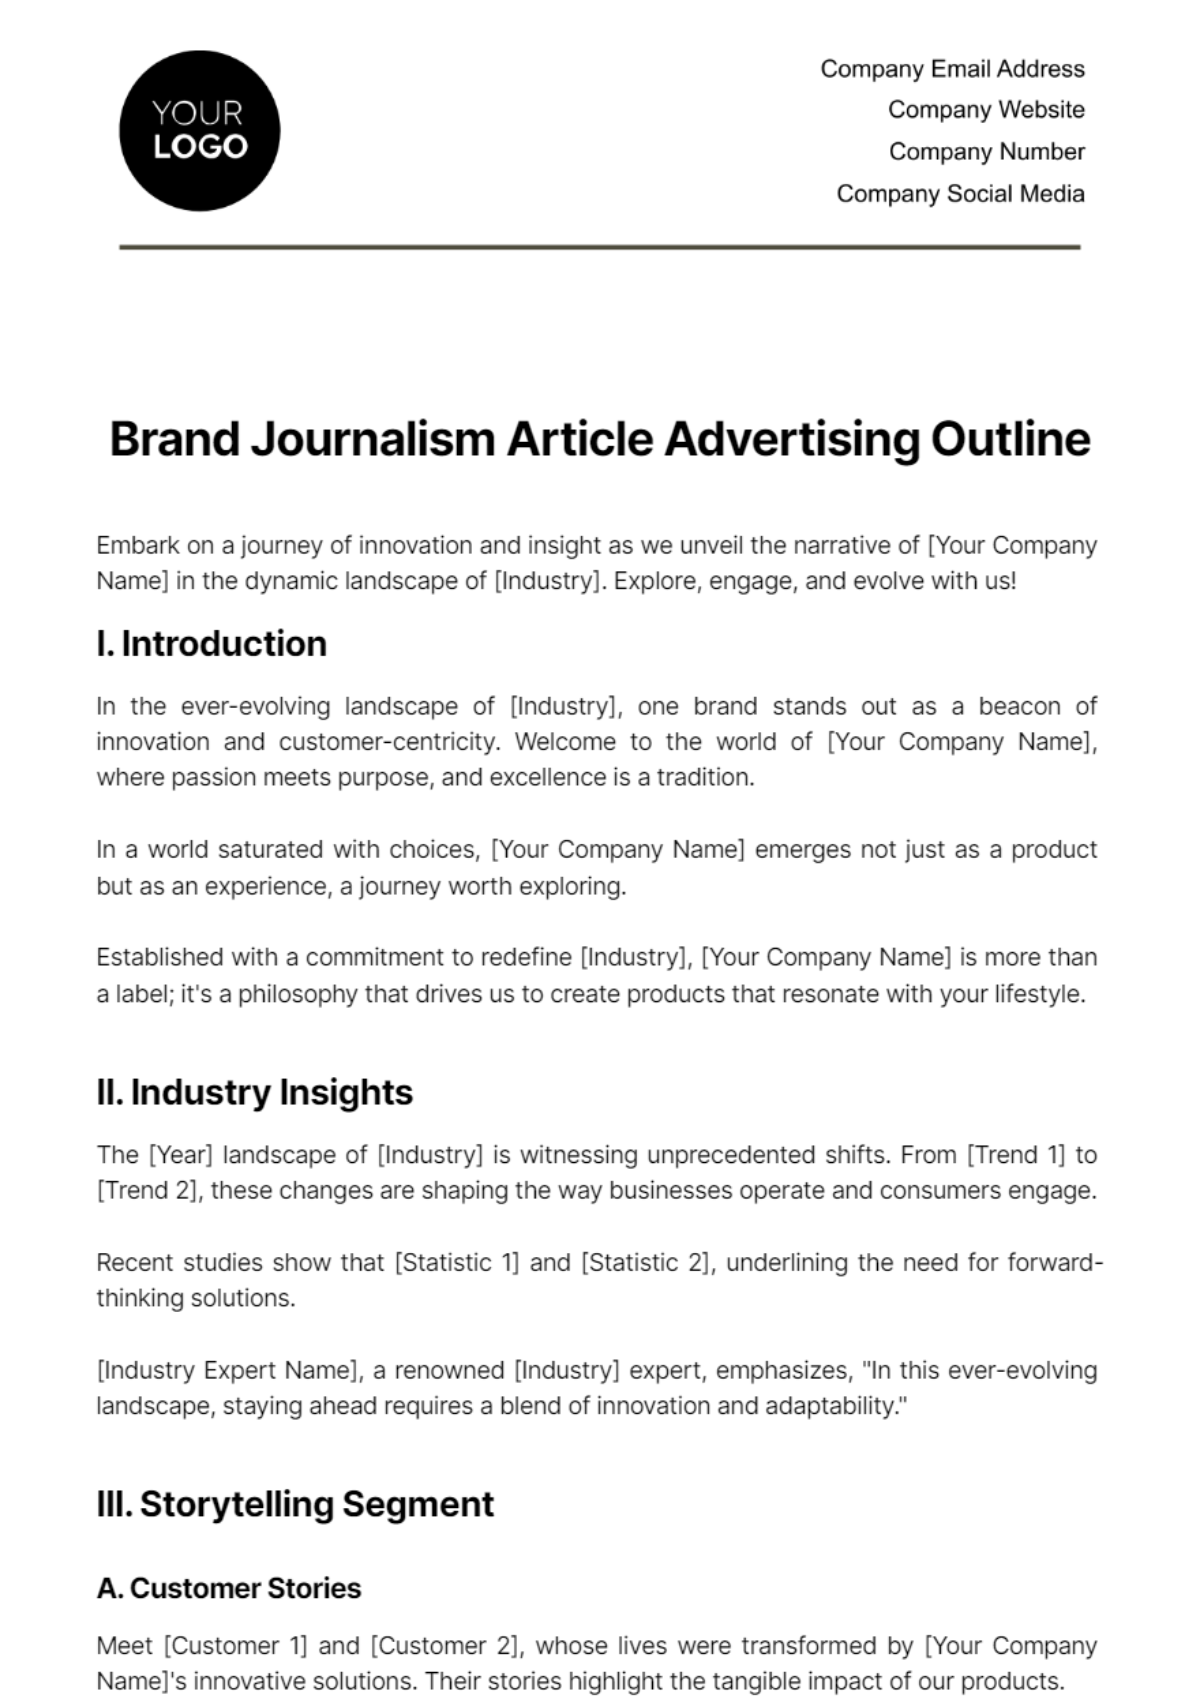 Brand Journalism Article Advertising Outline Template